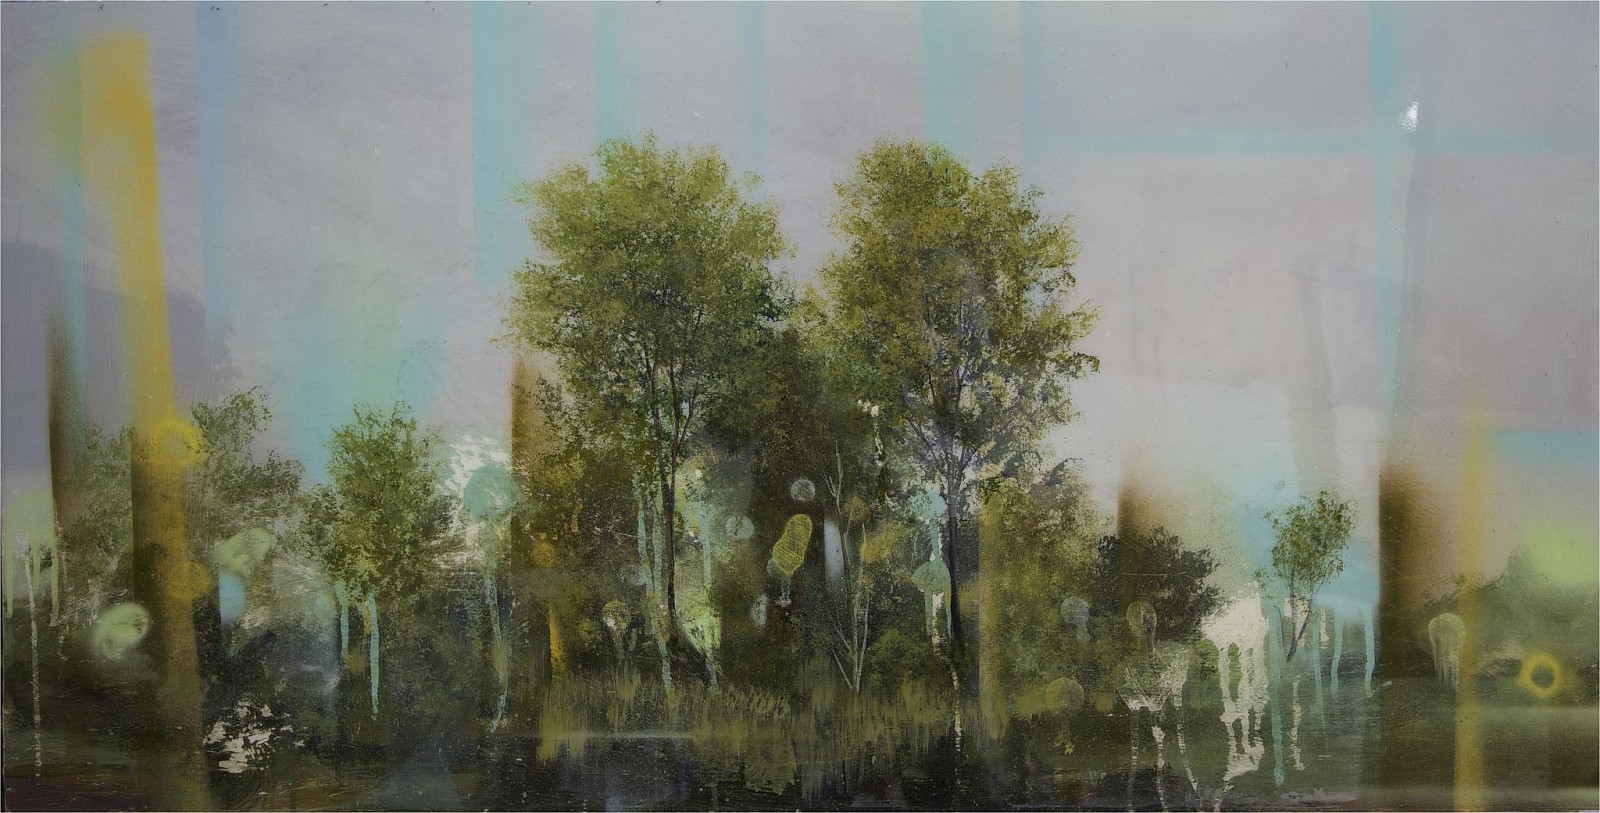 Peter Hoffer, Deux Arbres, 2015
Clay, Pigment, Epoxy on Panel, 24 x 48 in. (61 x 121.9 cm)
5561